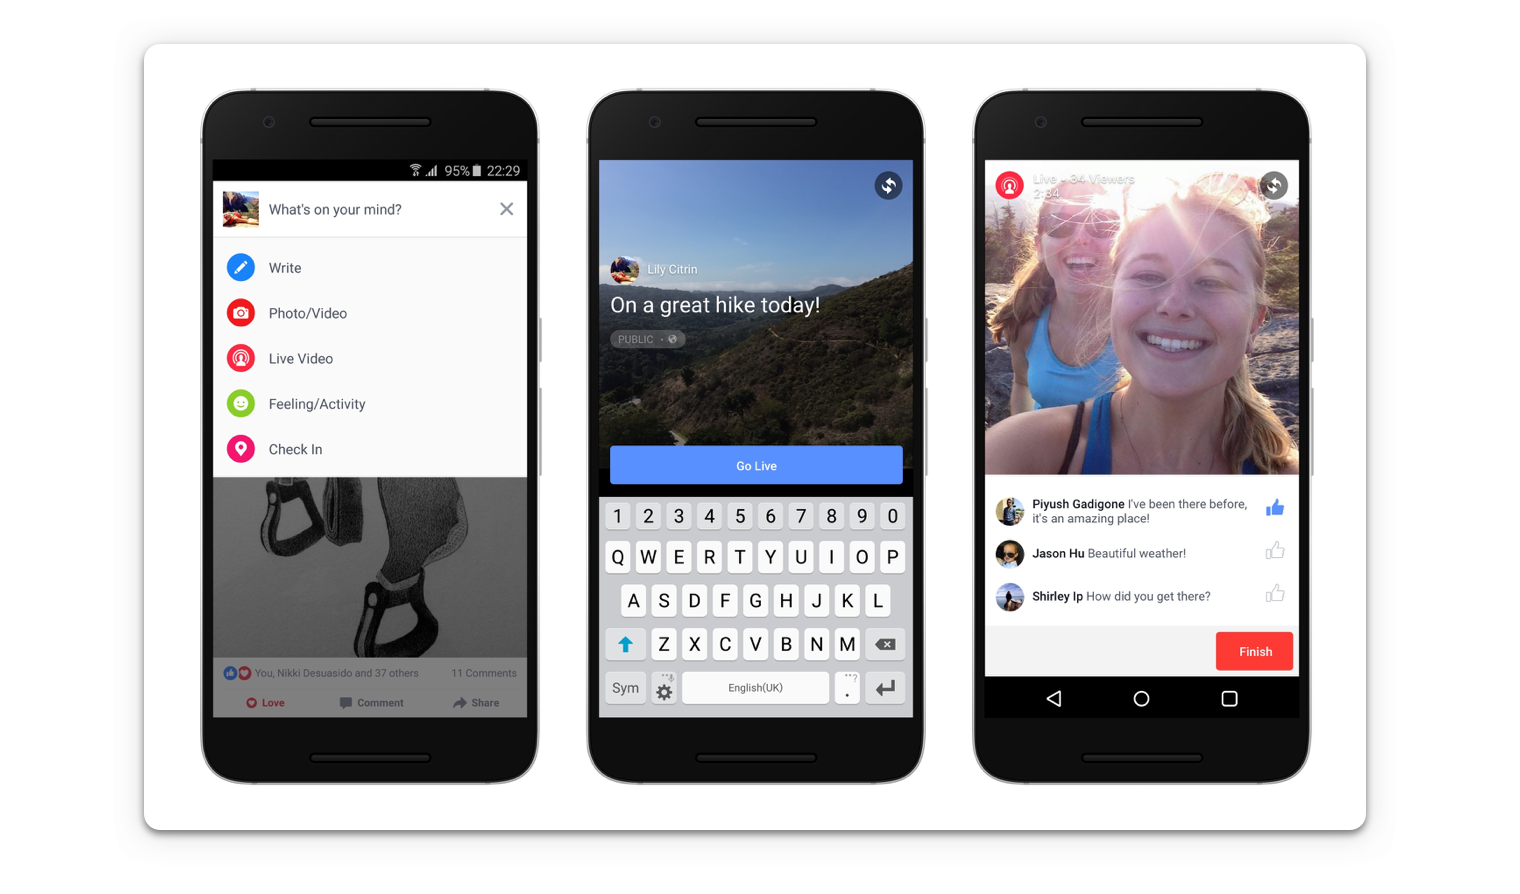 Facebook livestream chat on mobile devices